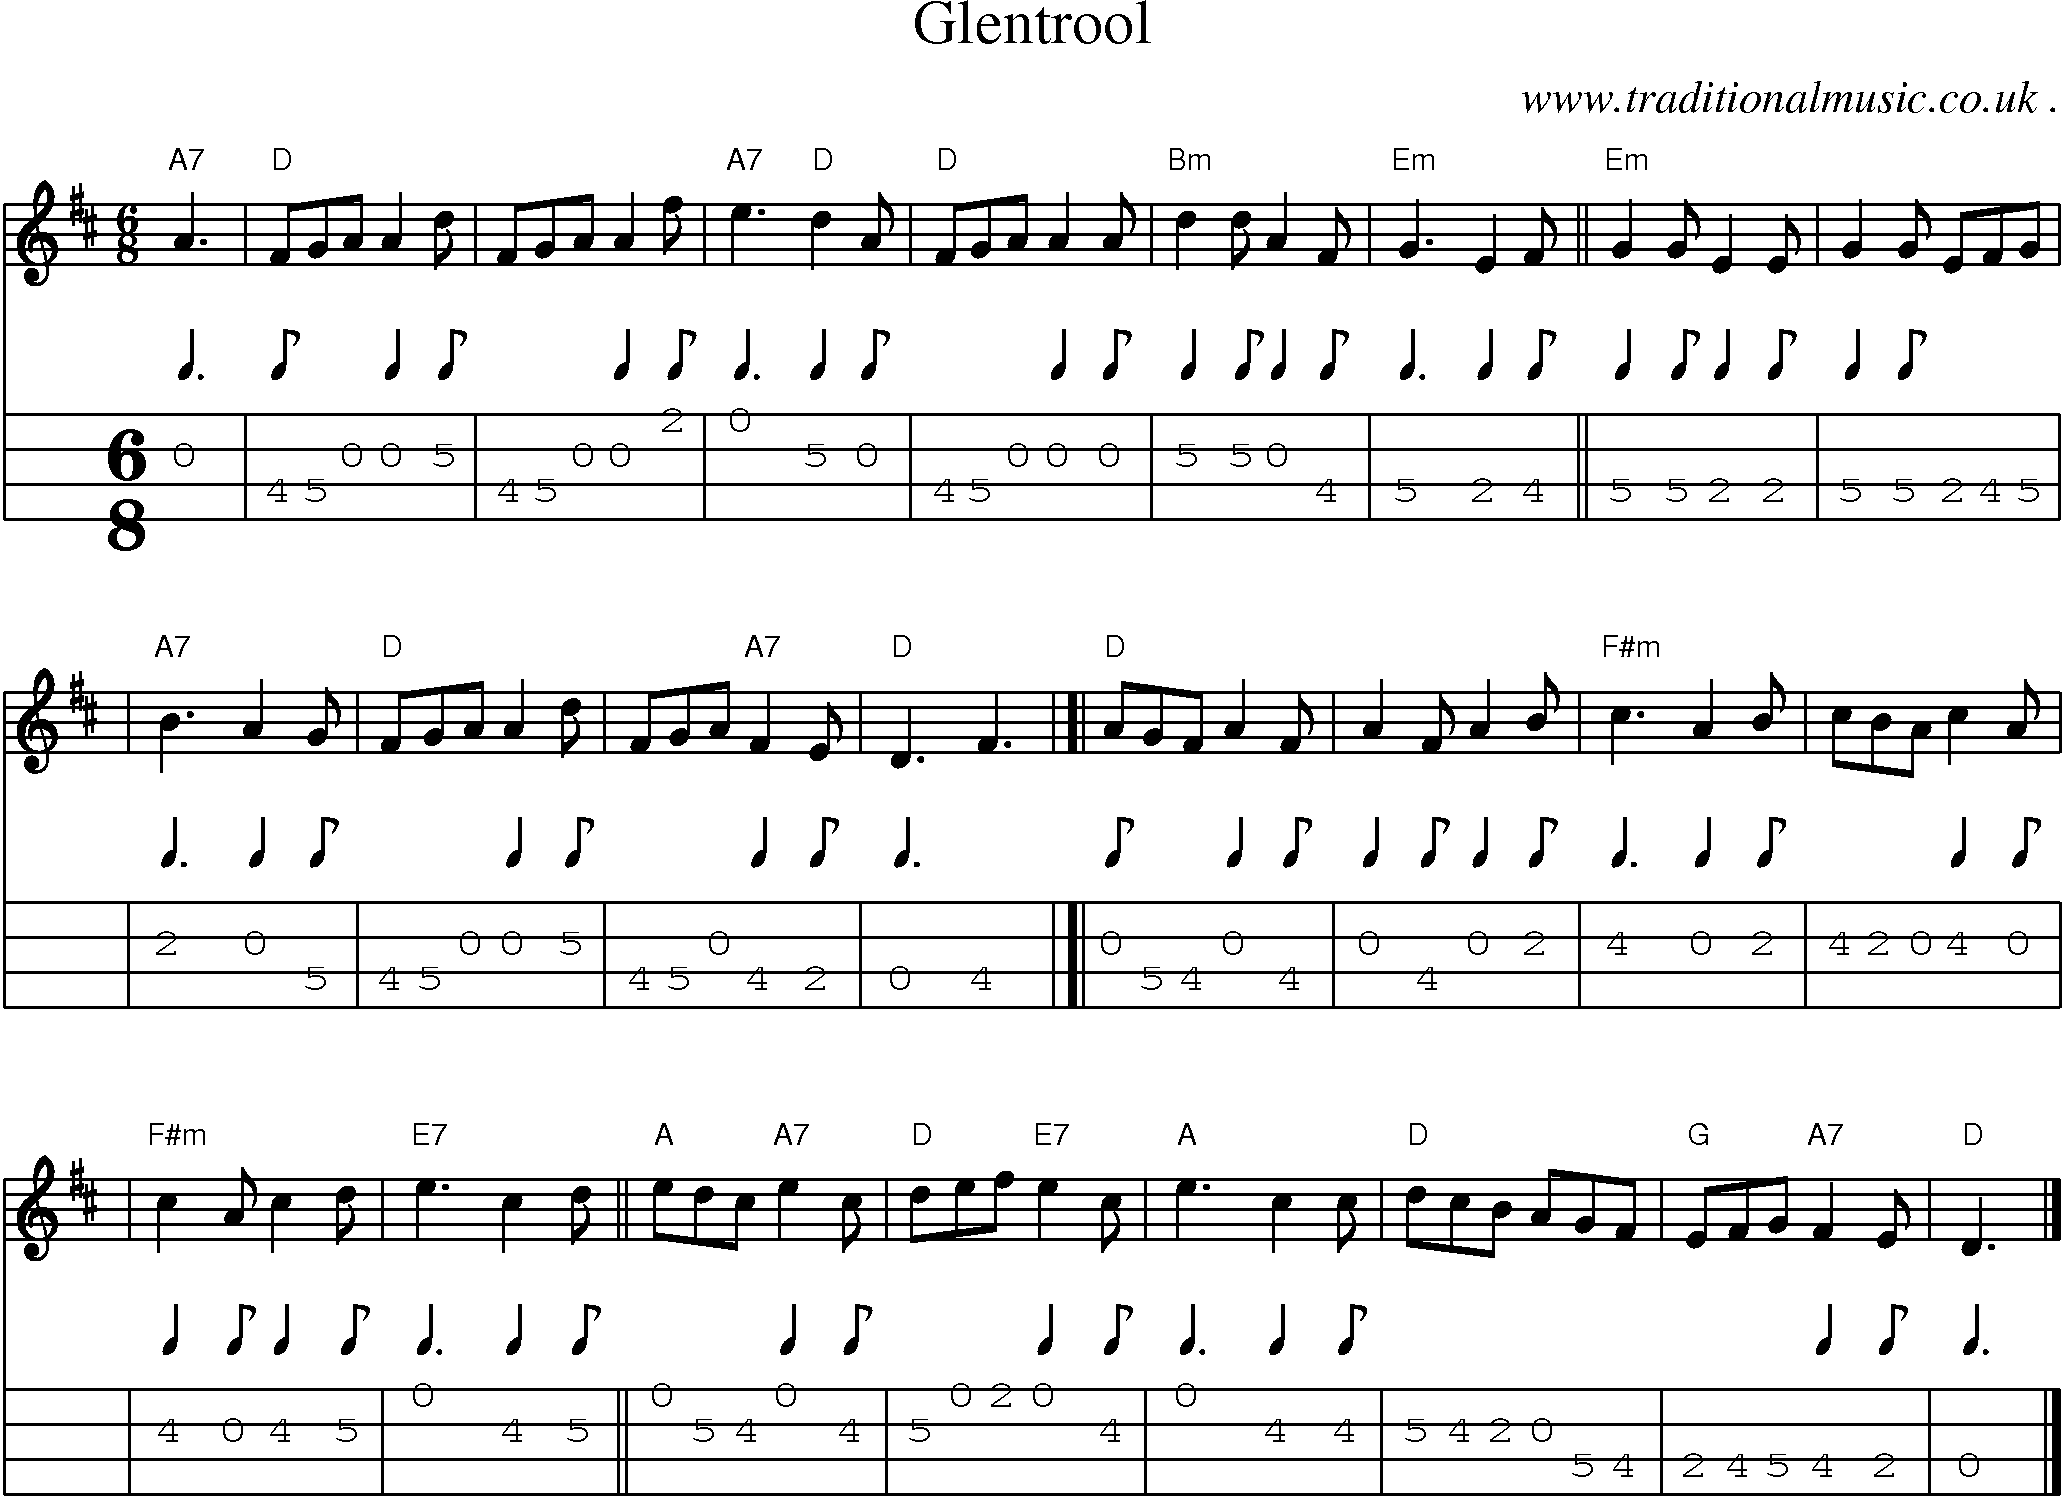 Sheet-music  score, Chords and Mandolin Tabs for Glentrool